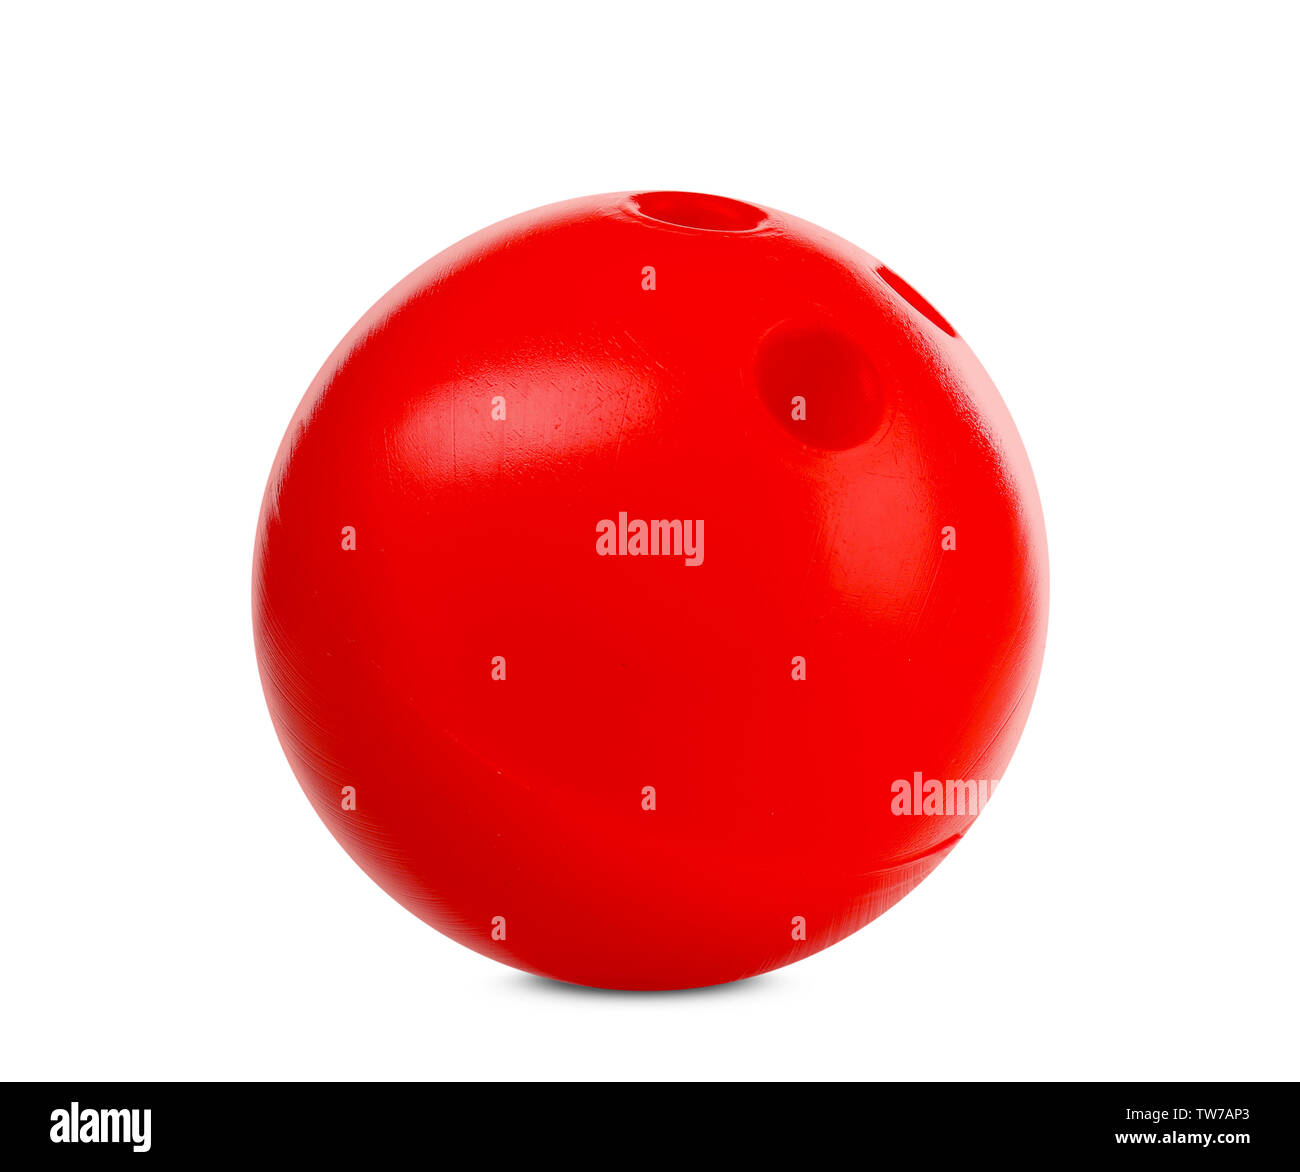 Toy bowling ball on white background Stock Photo